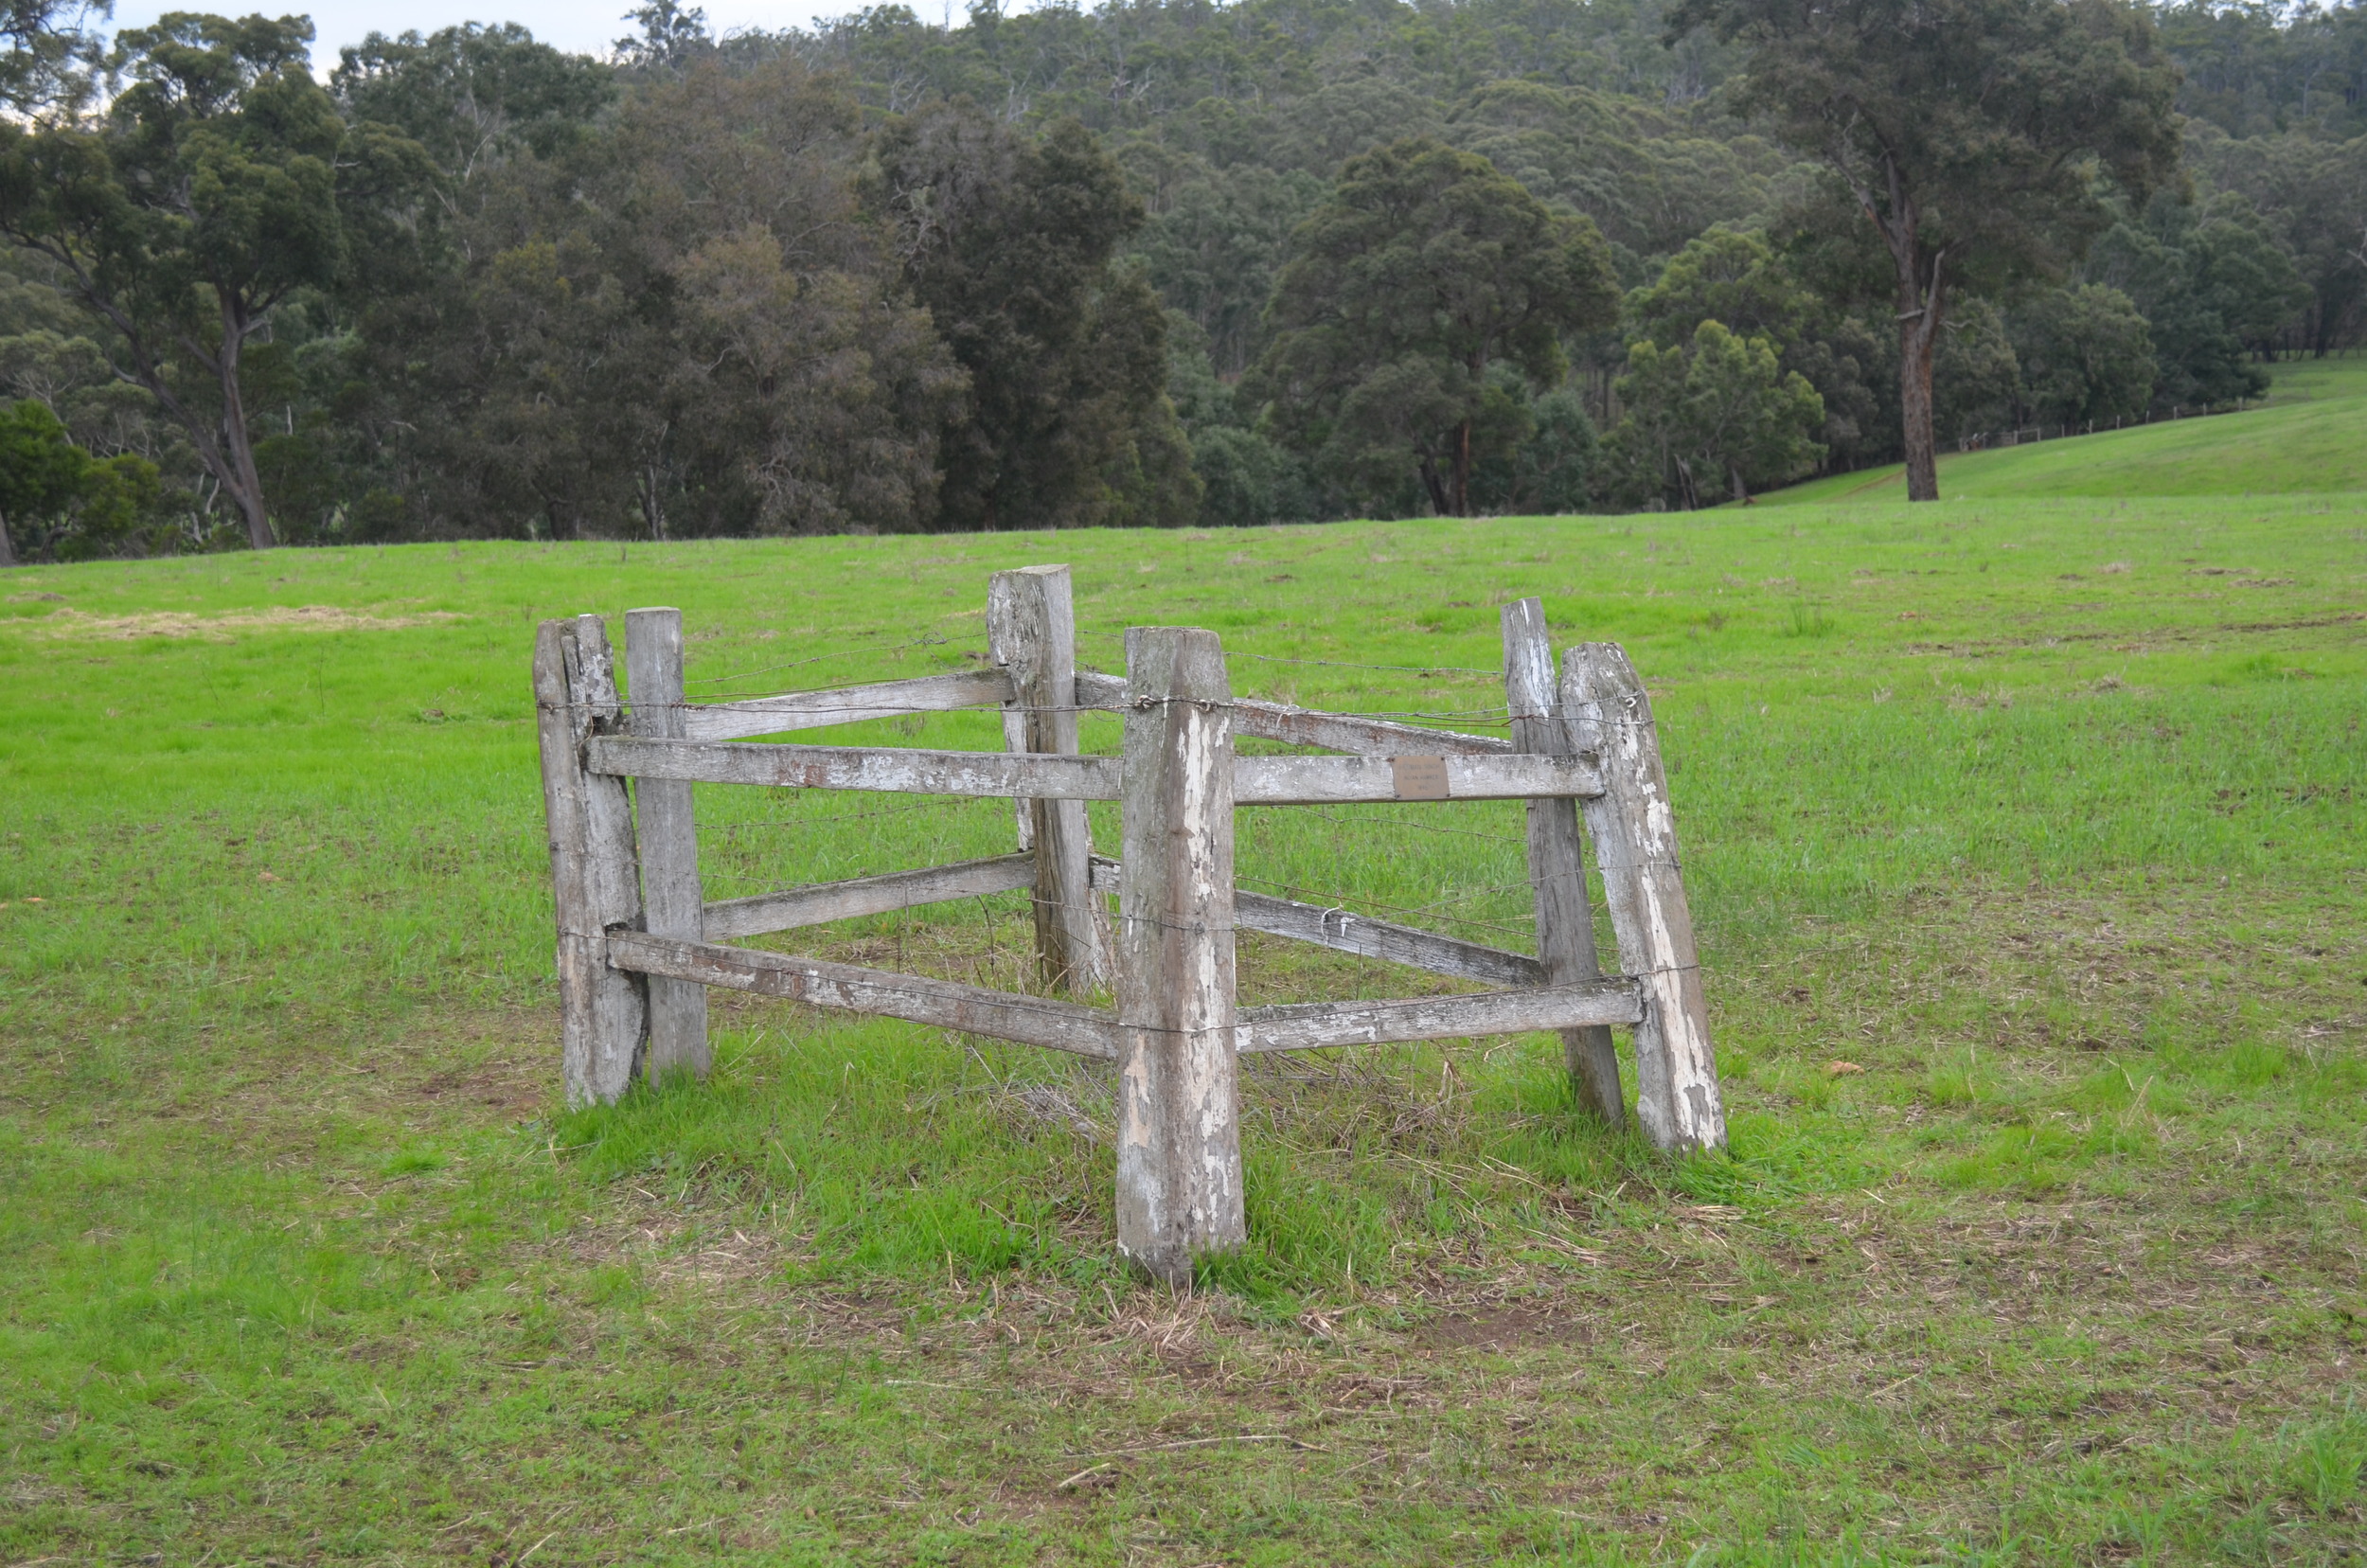 Herman Singh's cremation site is still kept clearly identified on the Muir family's farm. In the middle of a paddock, this site is left undisturbed even while farming activities continue all around.